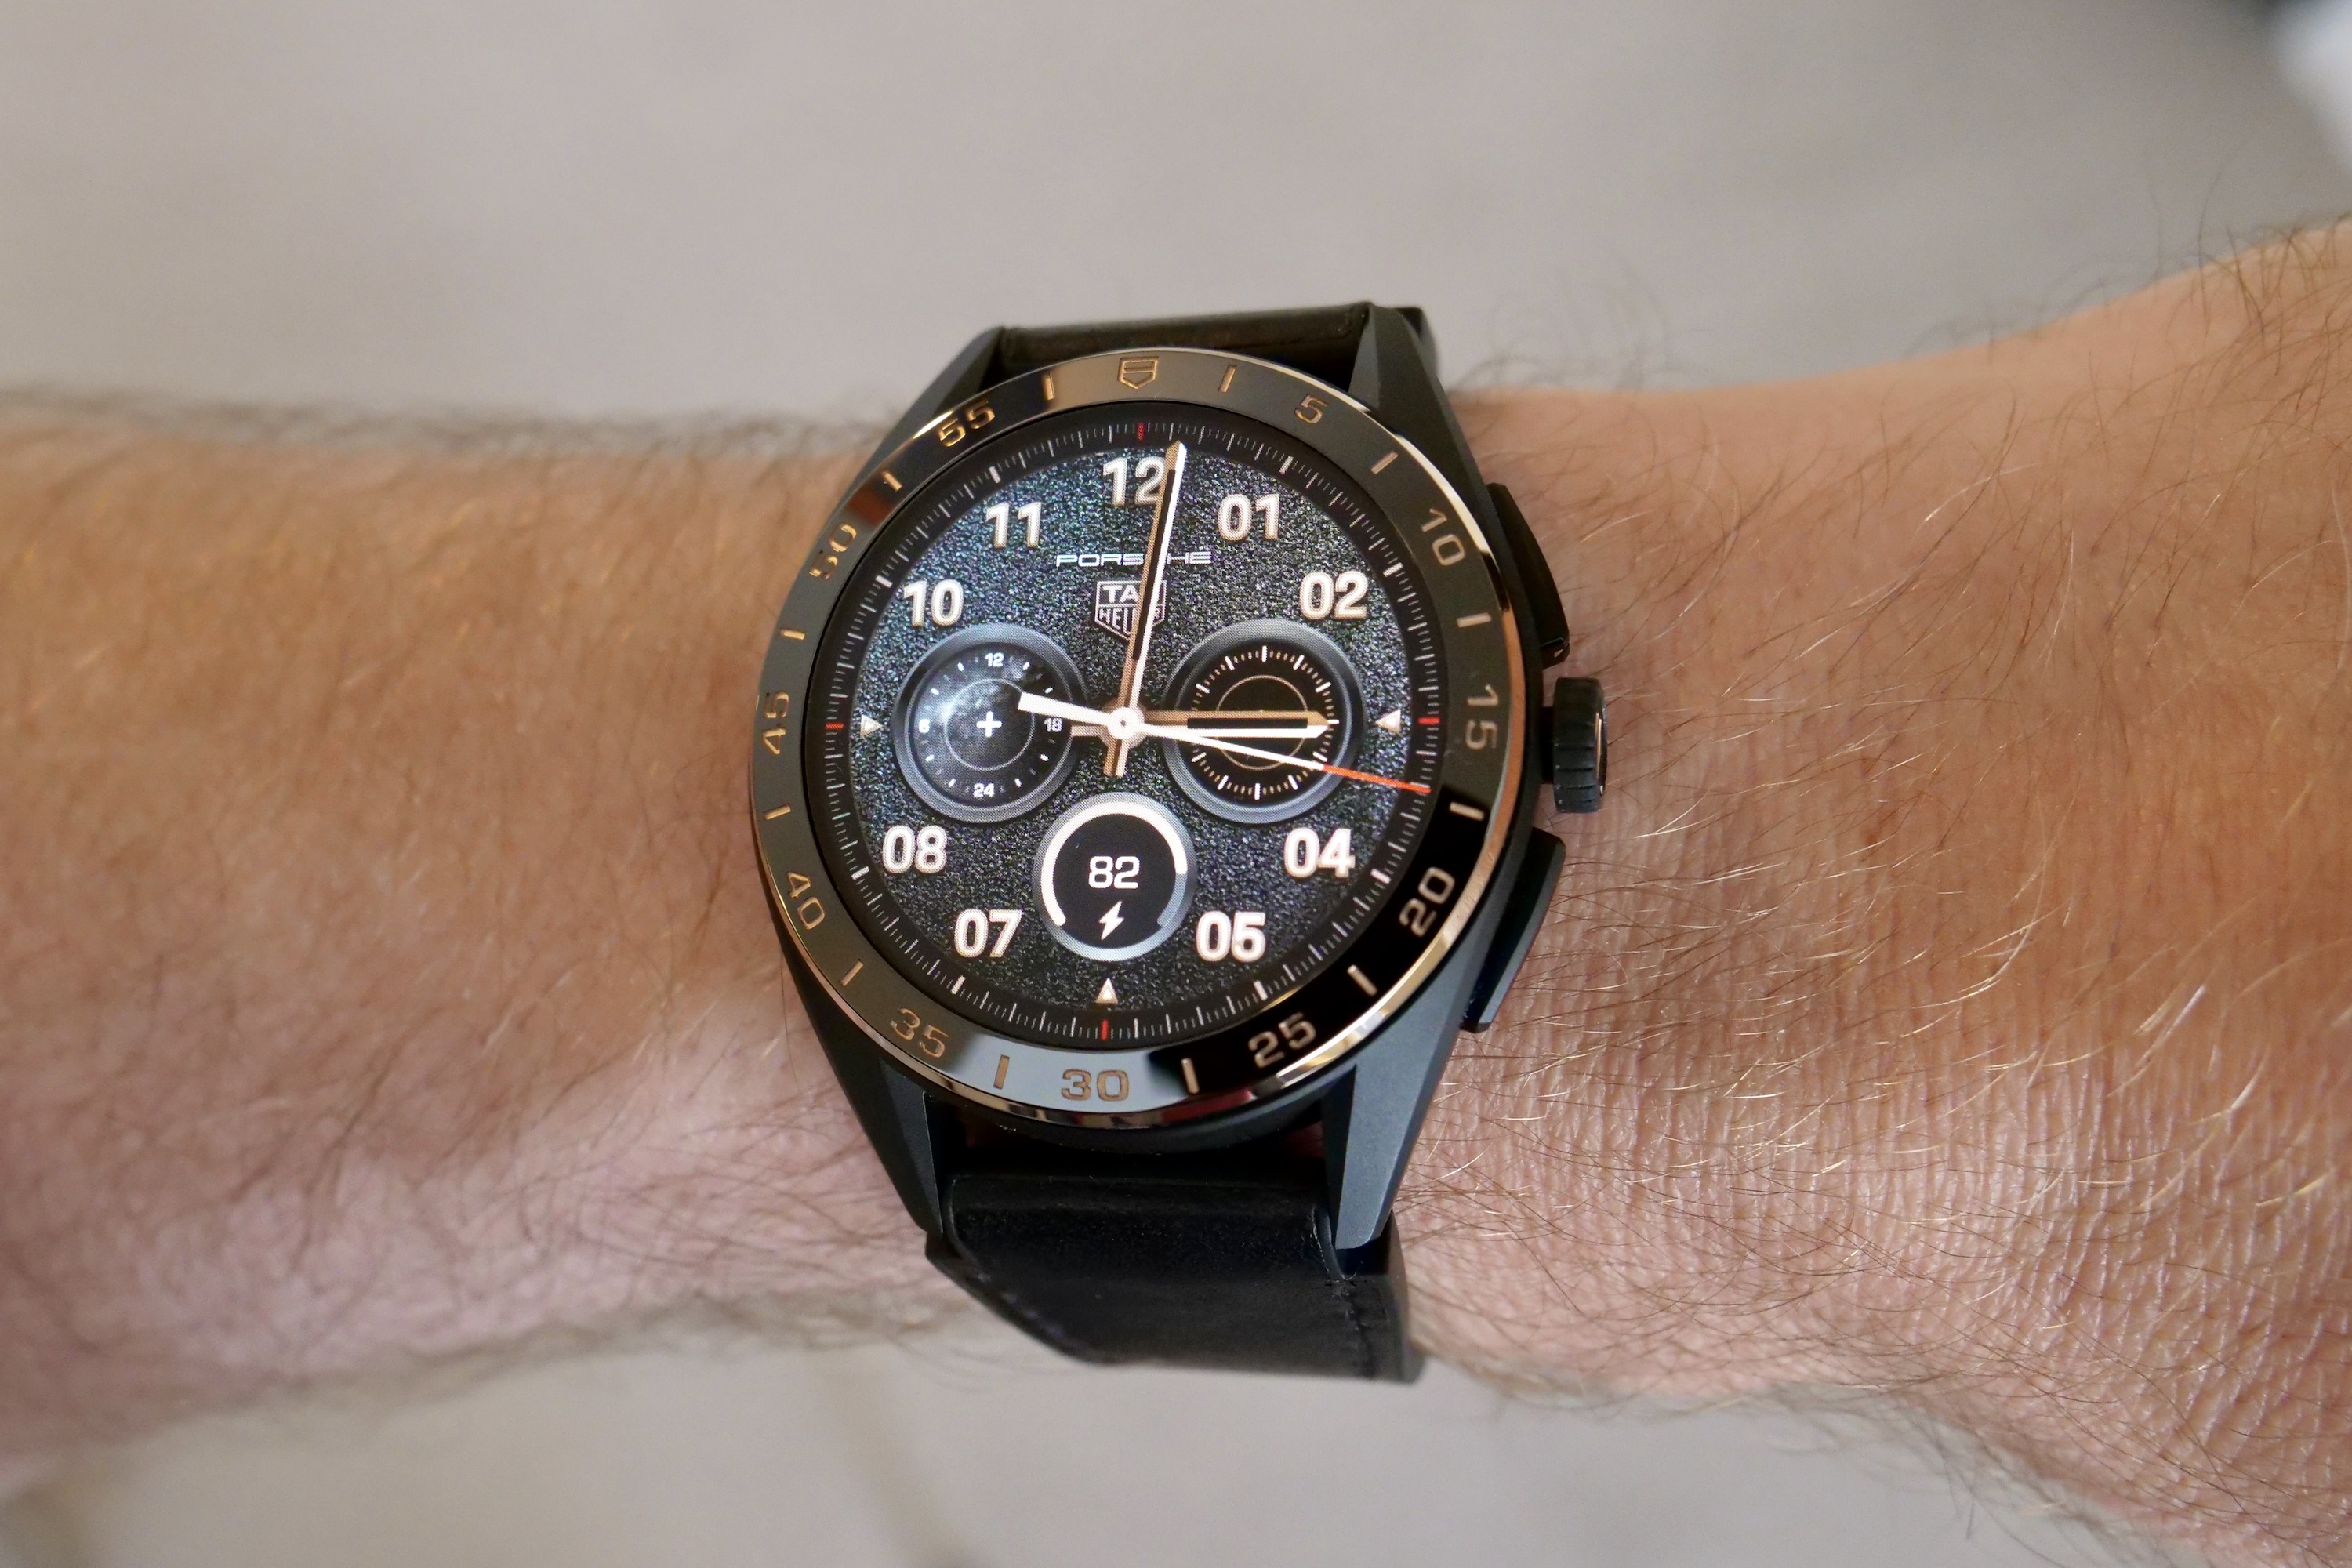 The Porsche watch face on the Tag Heuer Connected Calibre E4 Bright Black Edition.